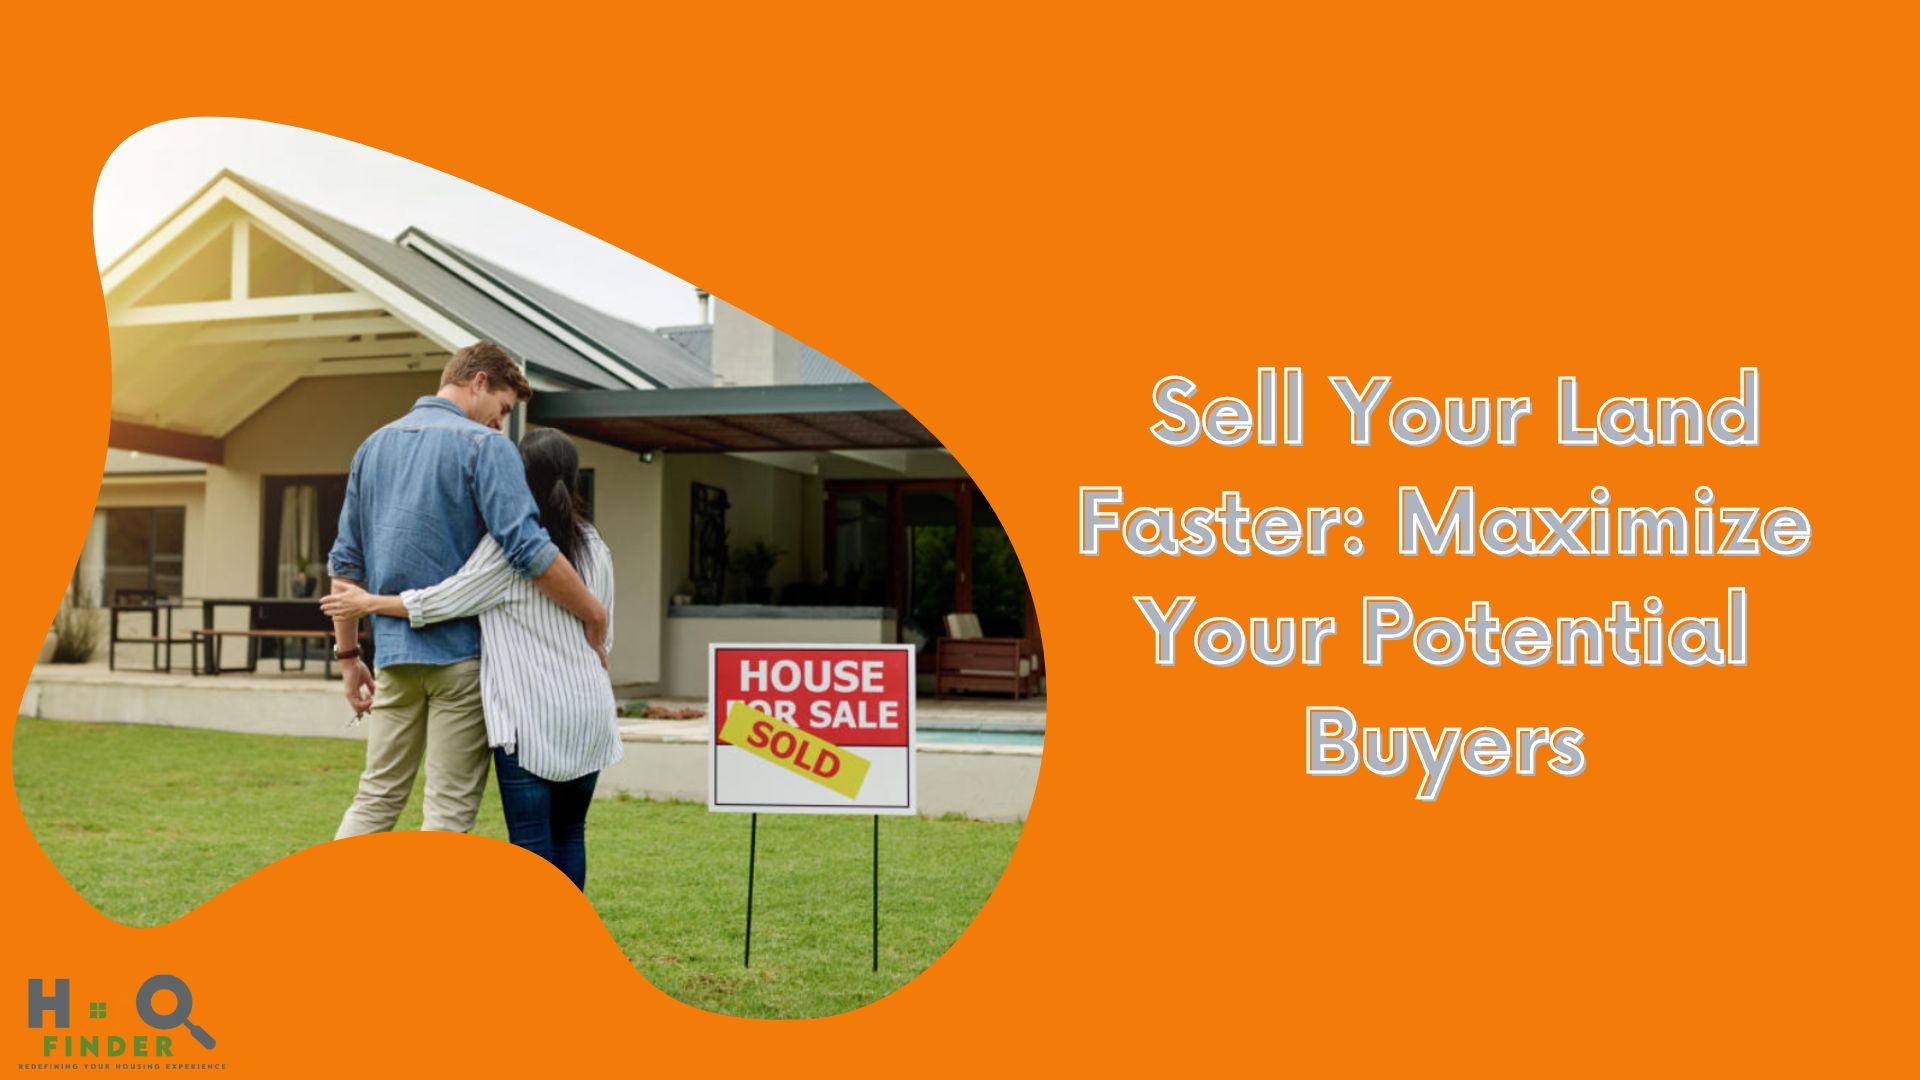  Sell Your Land Faster: Maximize Your Potential Buyers